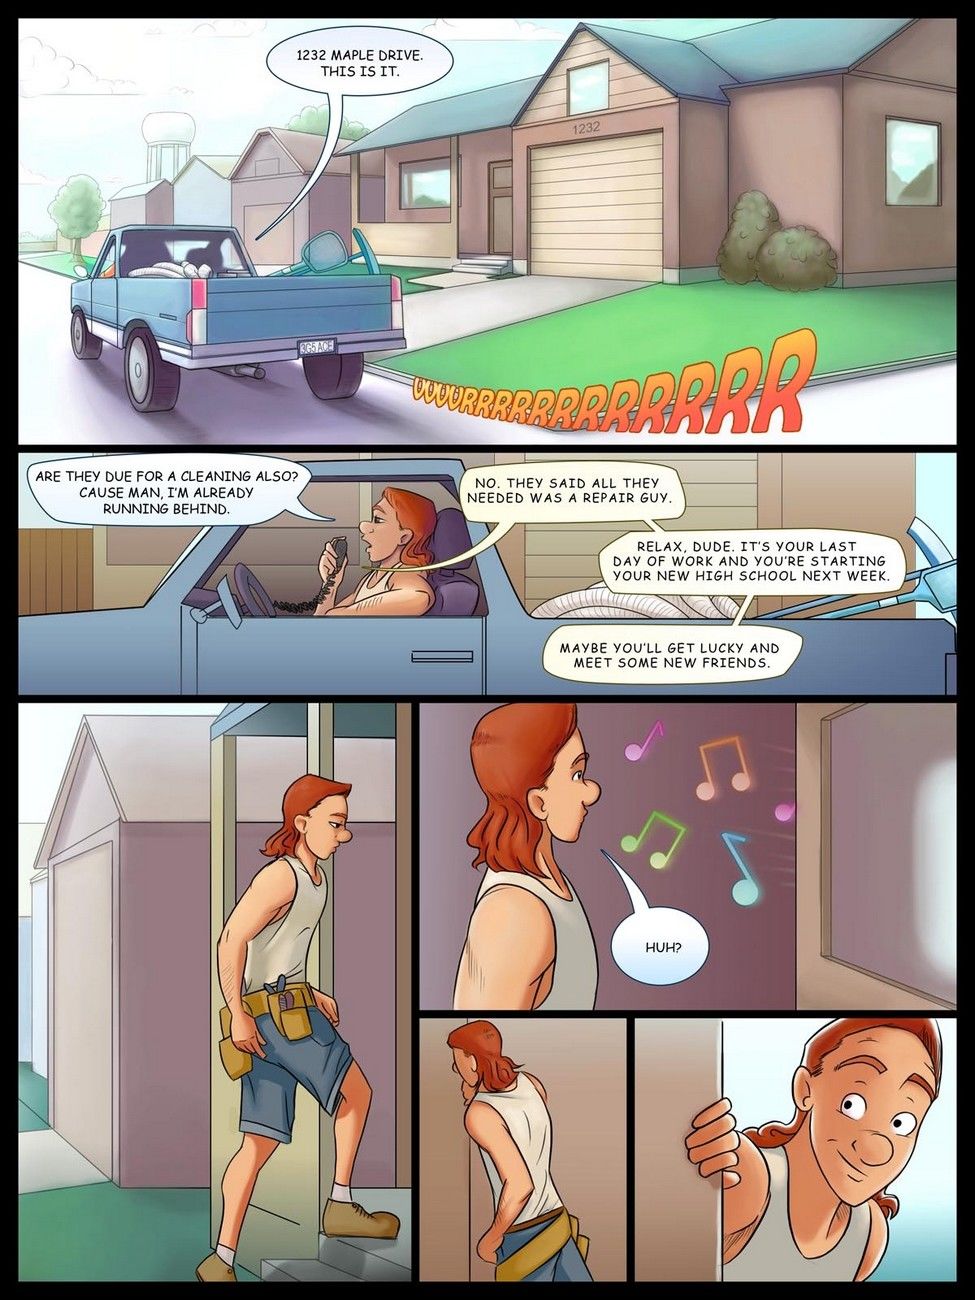 Serviced With A Smile page 2